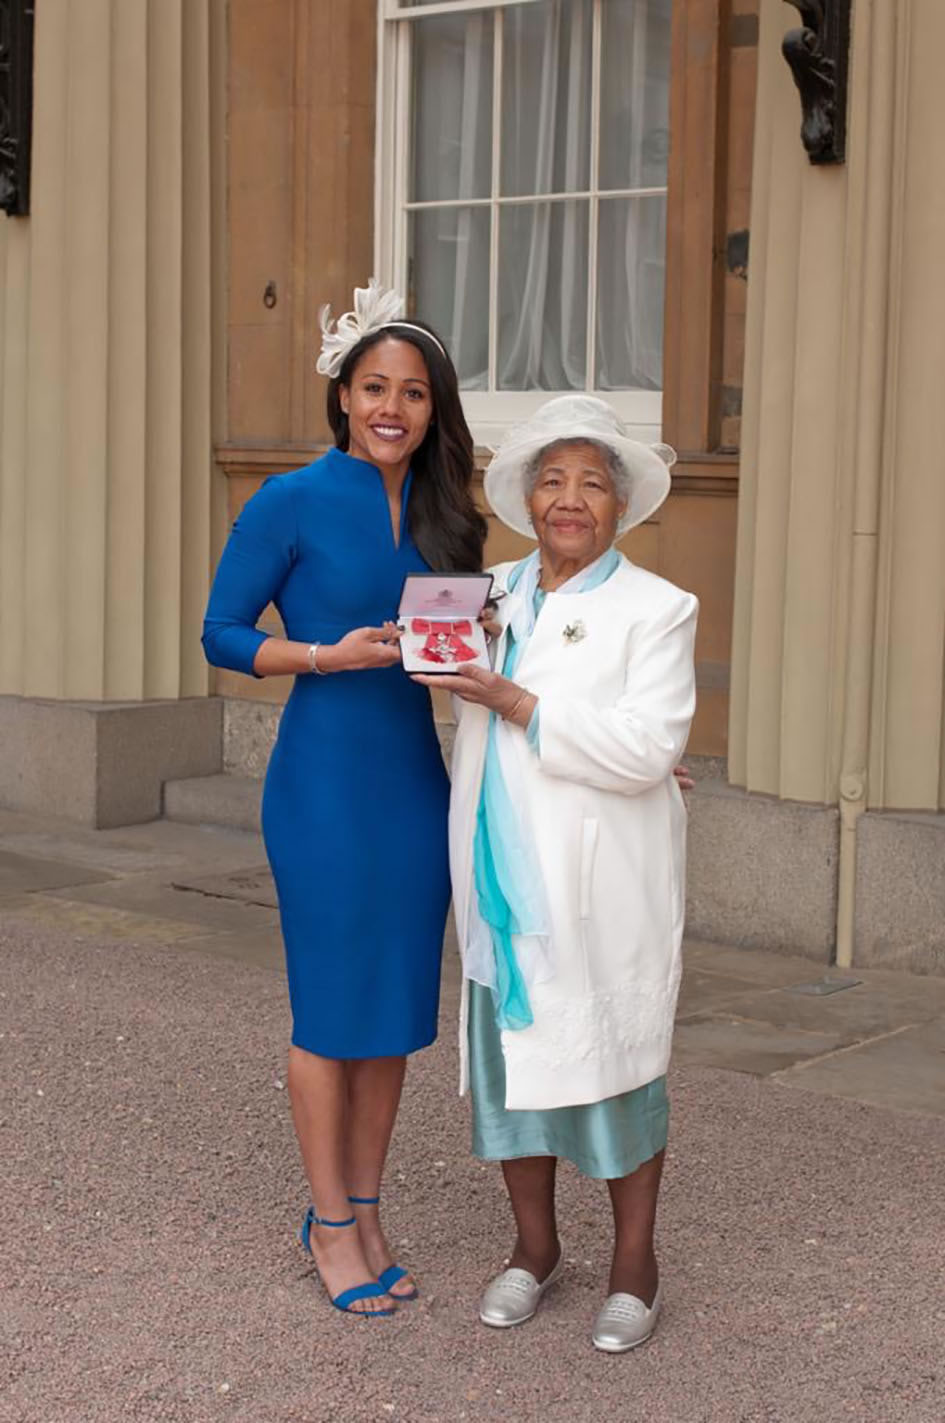 Alex Scott MBE receiving her MBE award, pictured with her grandmother, Philicita